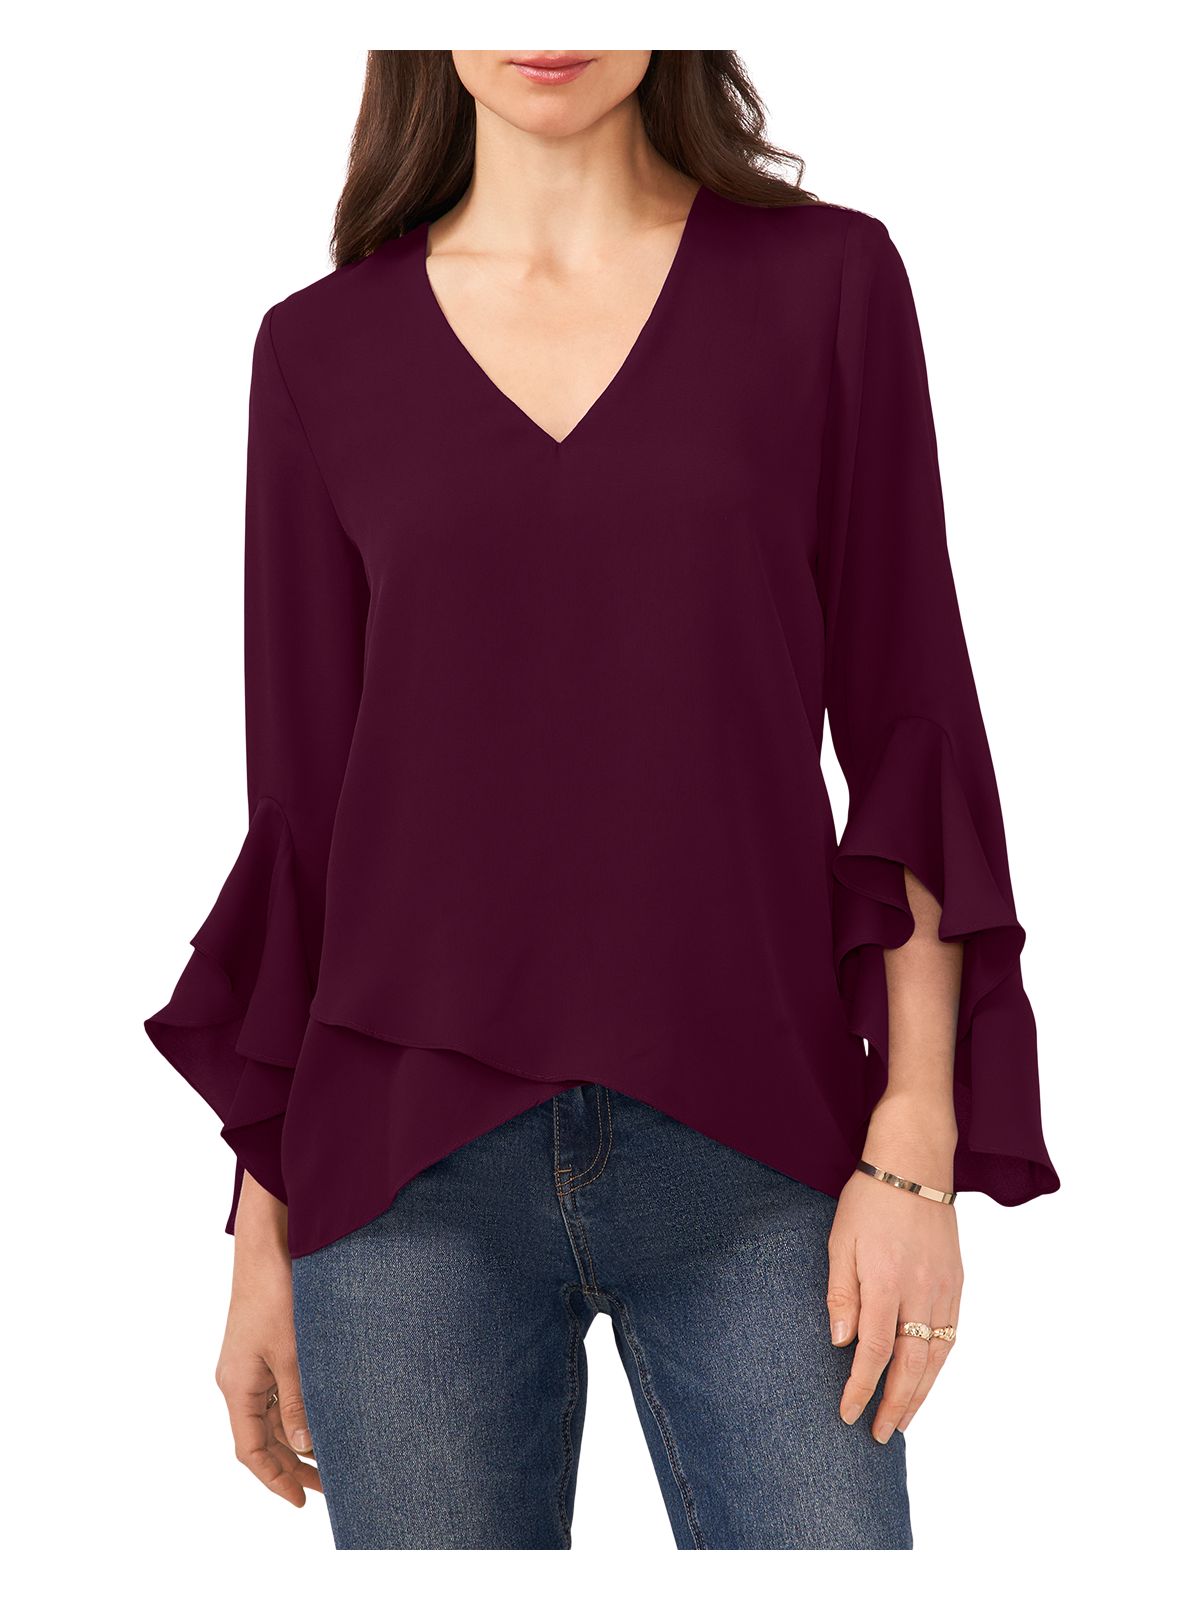 VINCE CAMUTO Womens Burgundy Gathered Flutter Sleeve V Neck Tunic Top S